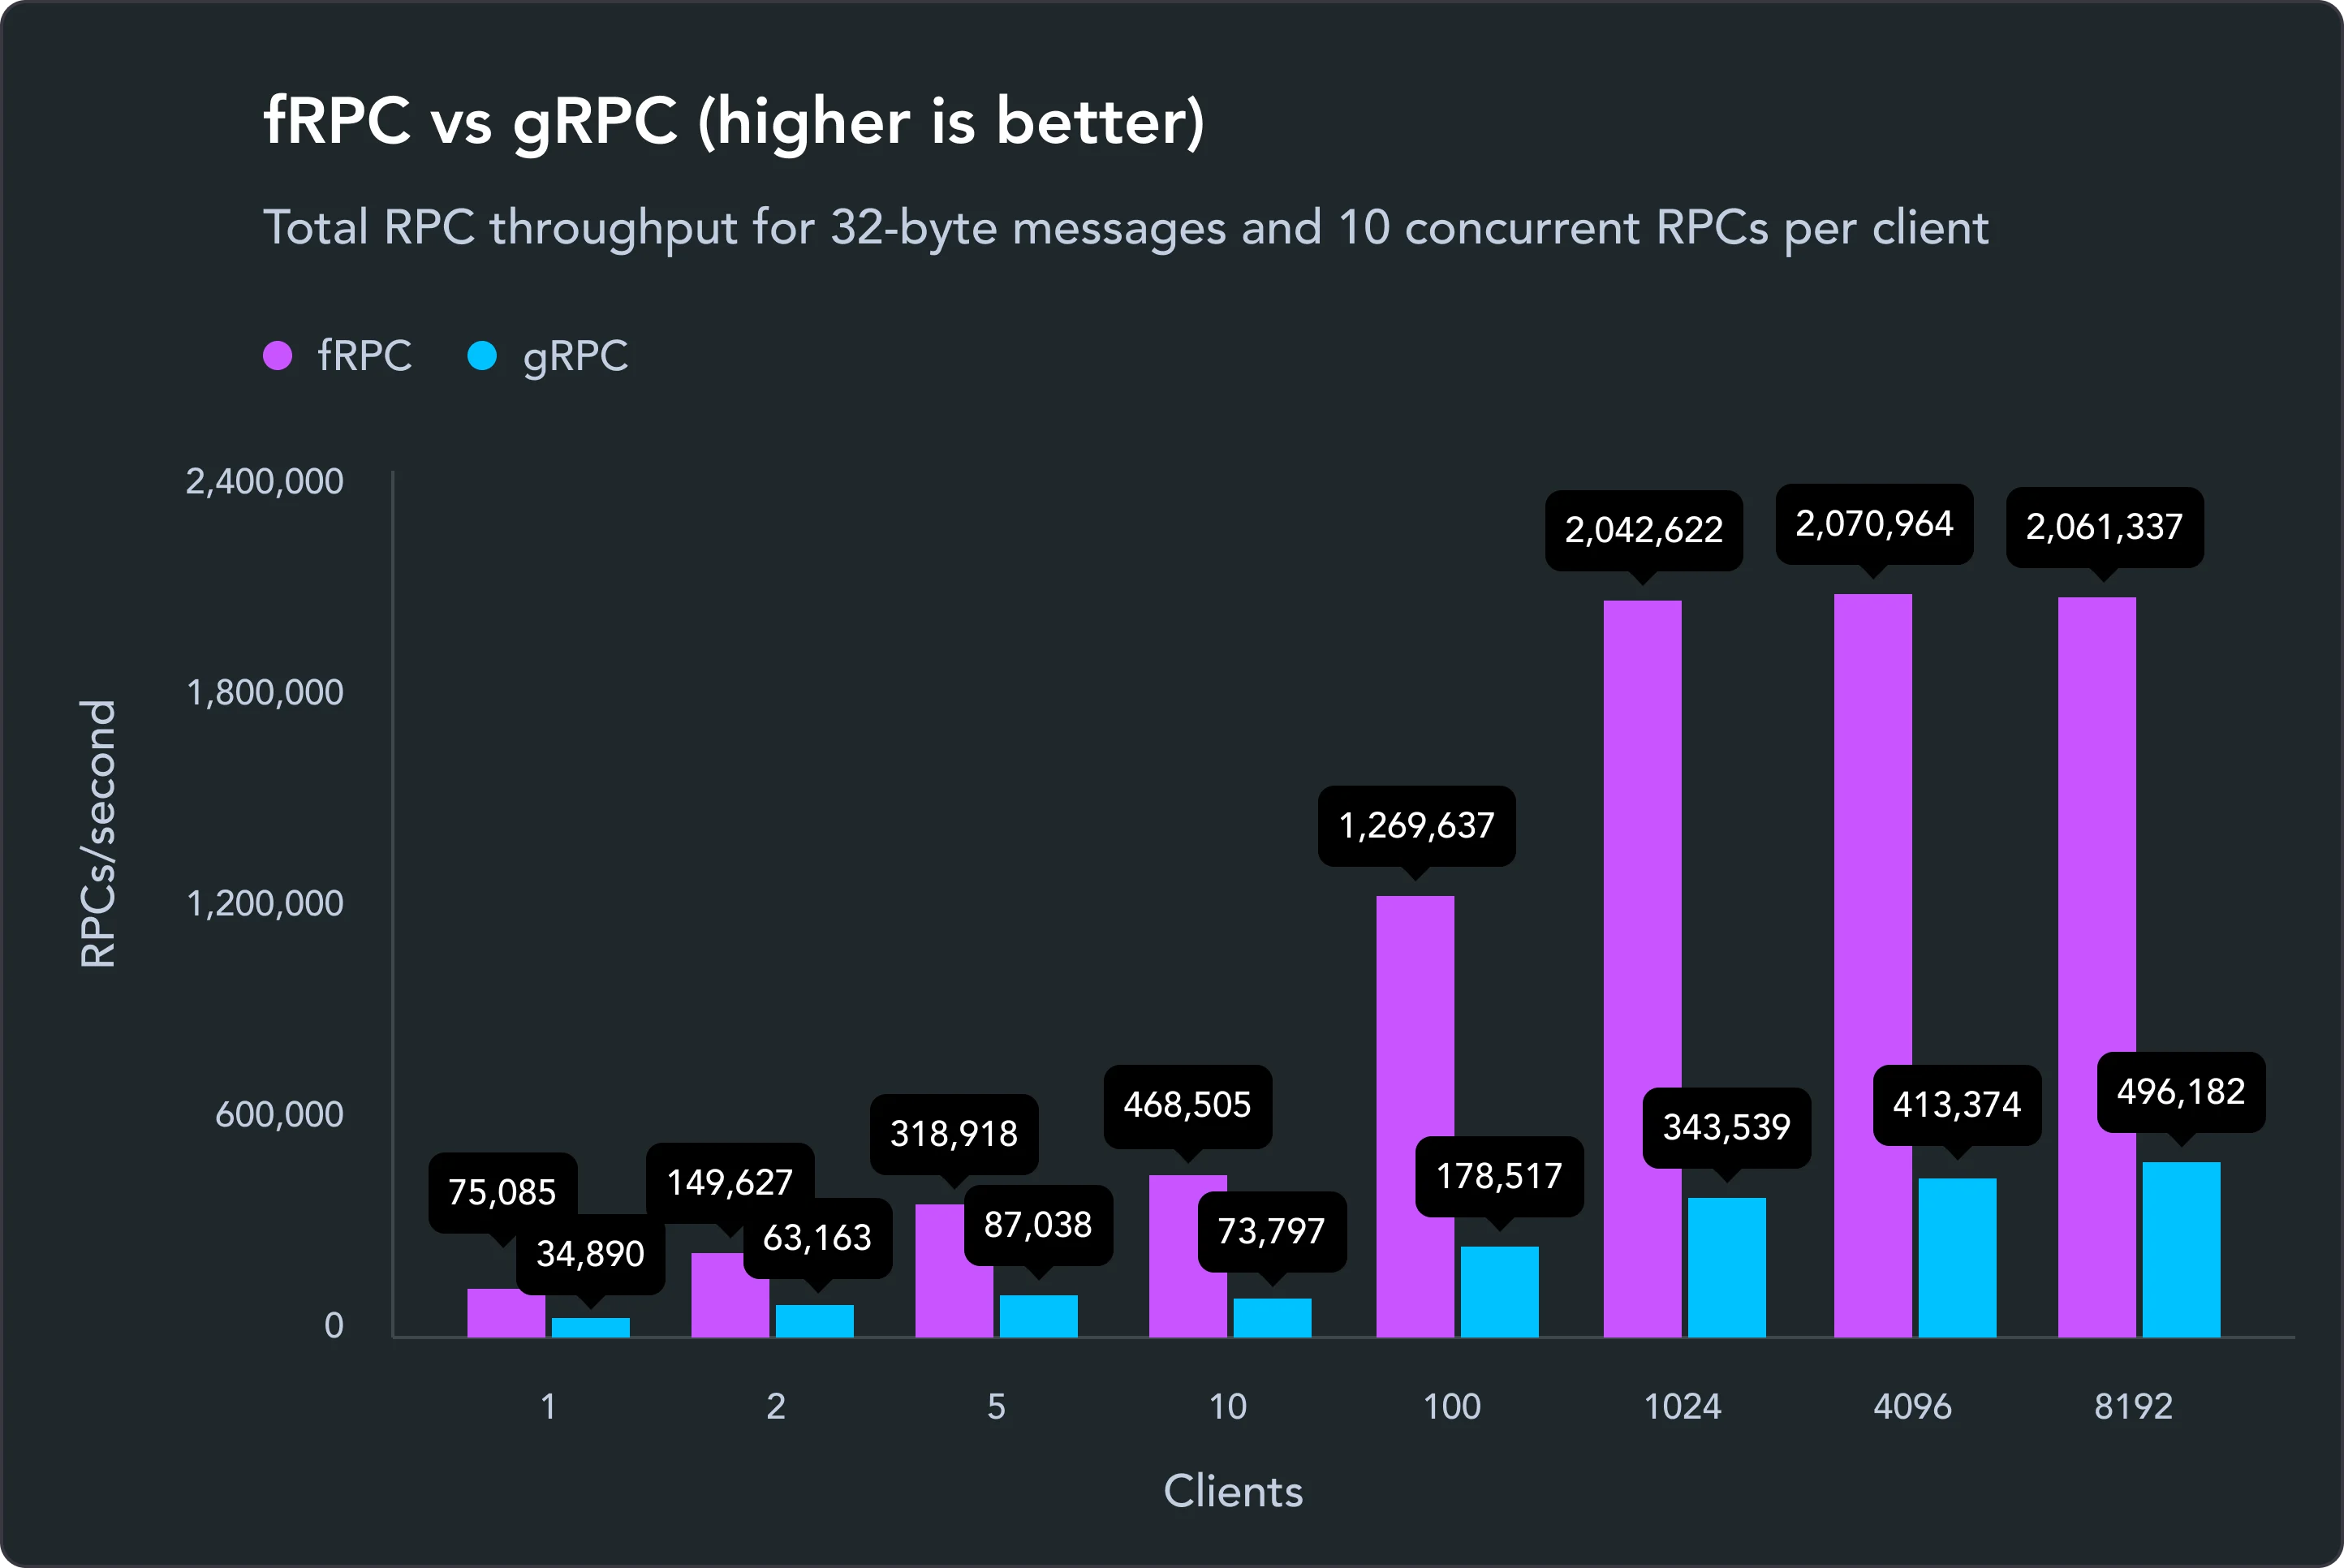 A graph showing a comparison between fRPC and gRPC. The graph represents data from a benchmark using 32-byte messages, with 10 concurrent RPCs per client. With a single client connected, fRPC achieves 75,085 RPCs per second vs gRPC's 34,890. With 8,192 clients, fRPC achieves 2,061,337 RPCs per second vs gRPC's 496,182.